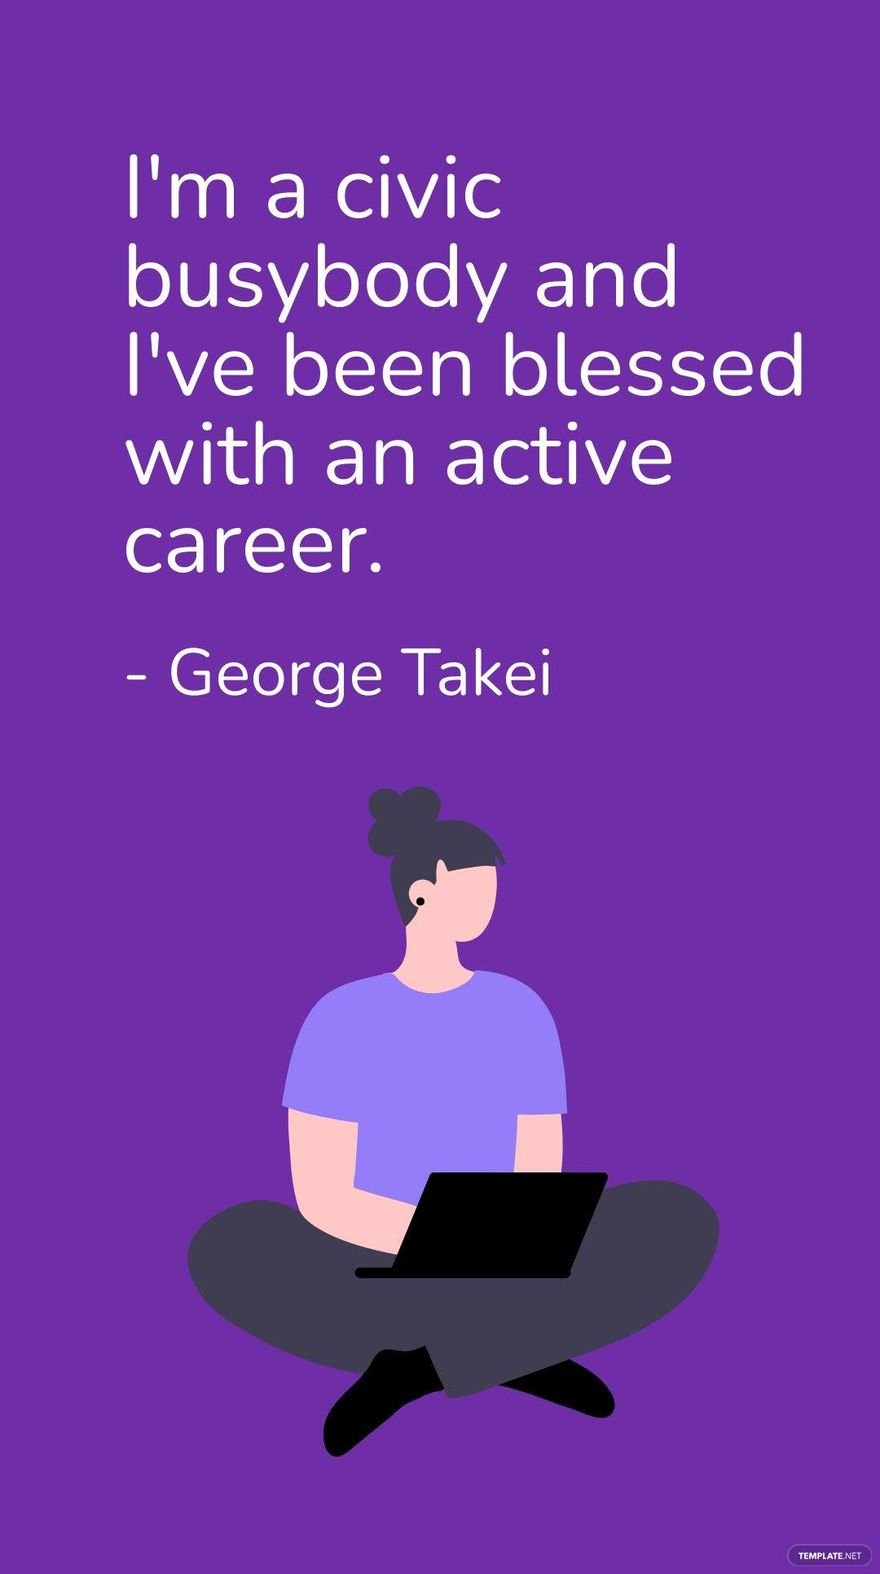 Free George Takei - I'm a civic busybody and I've been blessed with an active career. in JPG